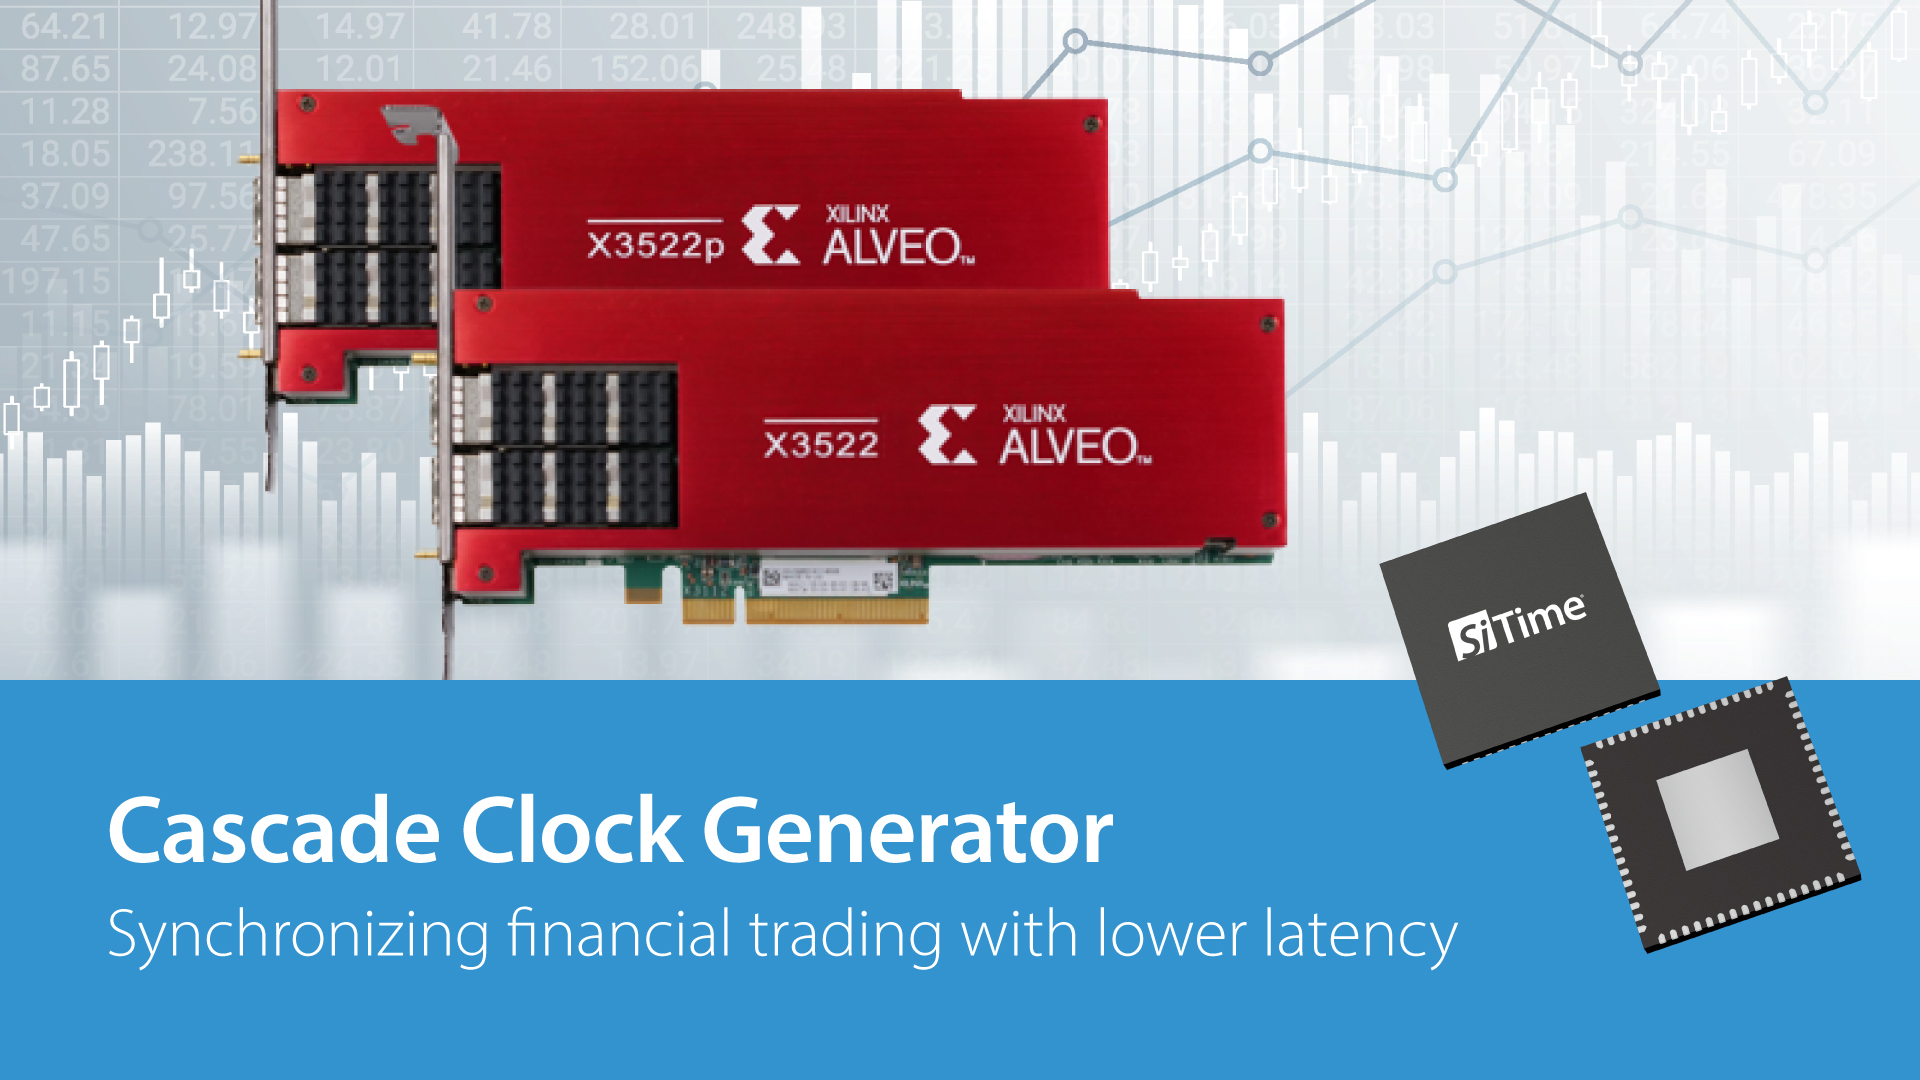 SiTime Precision Timing Solution Provides Clocking for New AMD Alveo X3 Series Platform